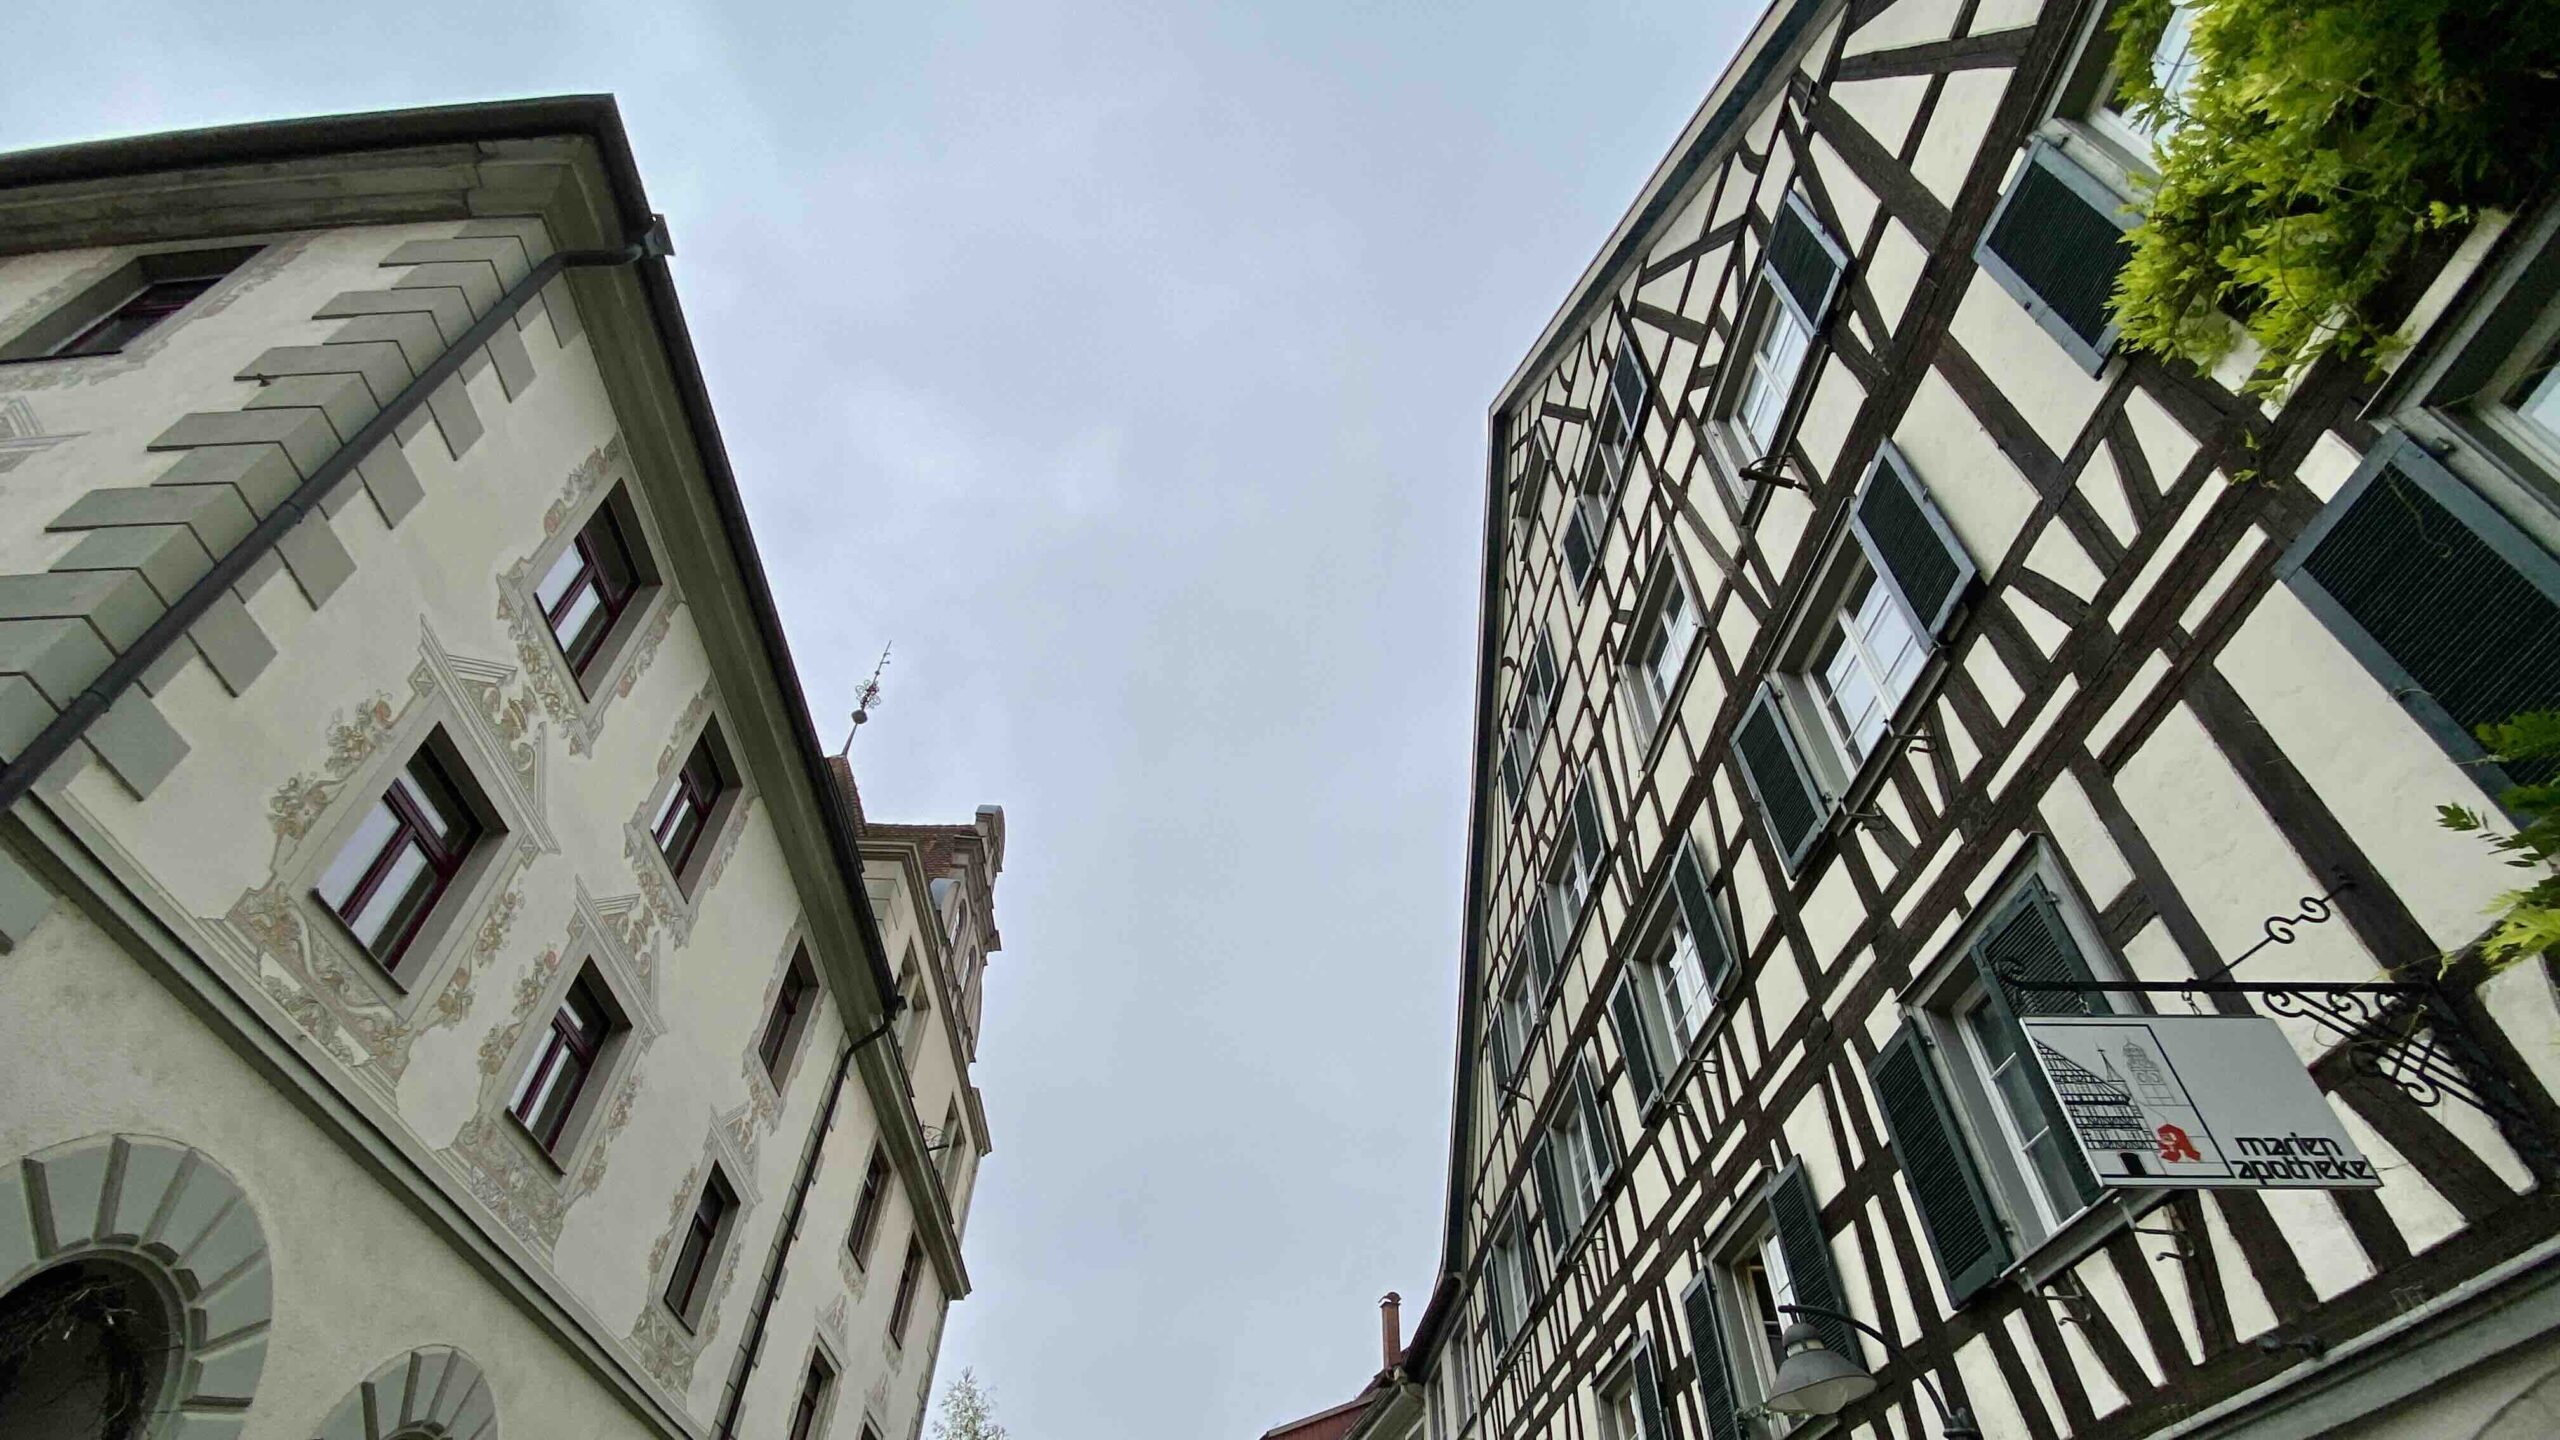 Ravensburg Old Town streetscape by Bryan dearsley copy